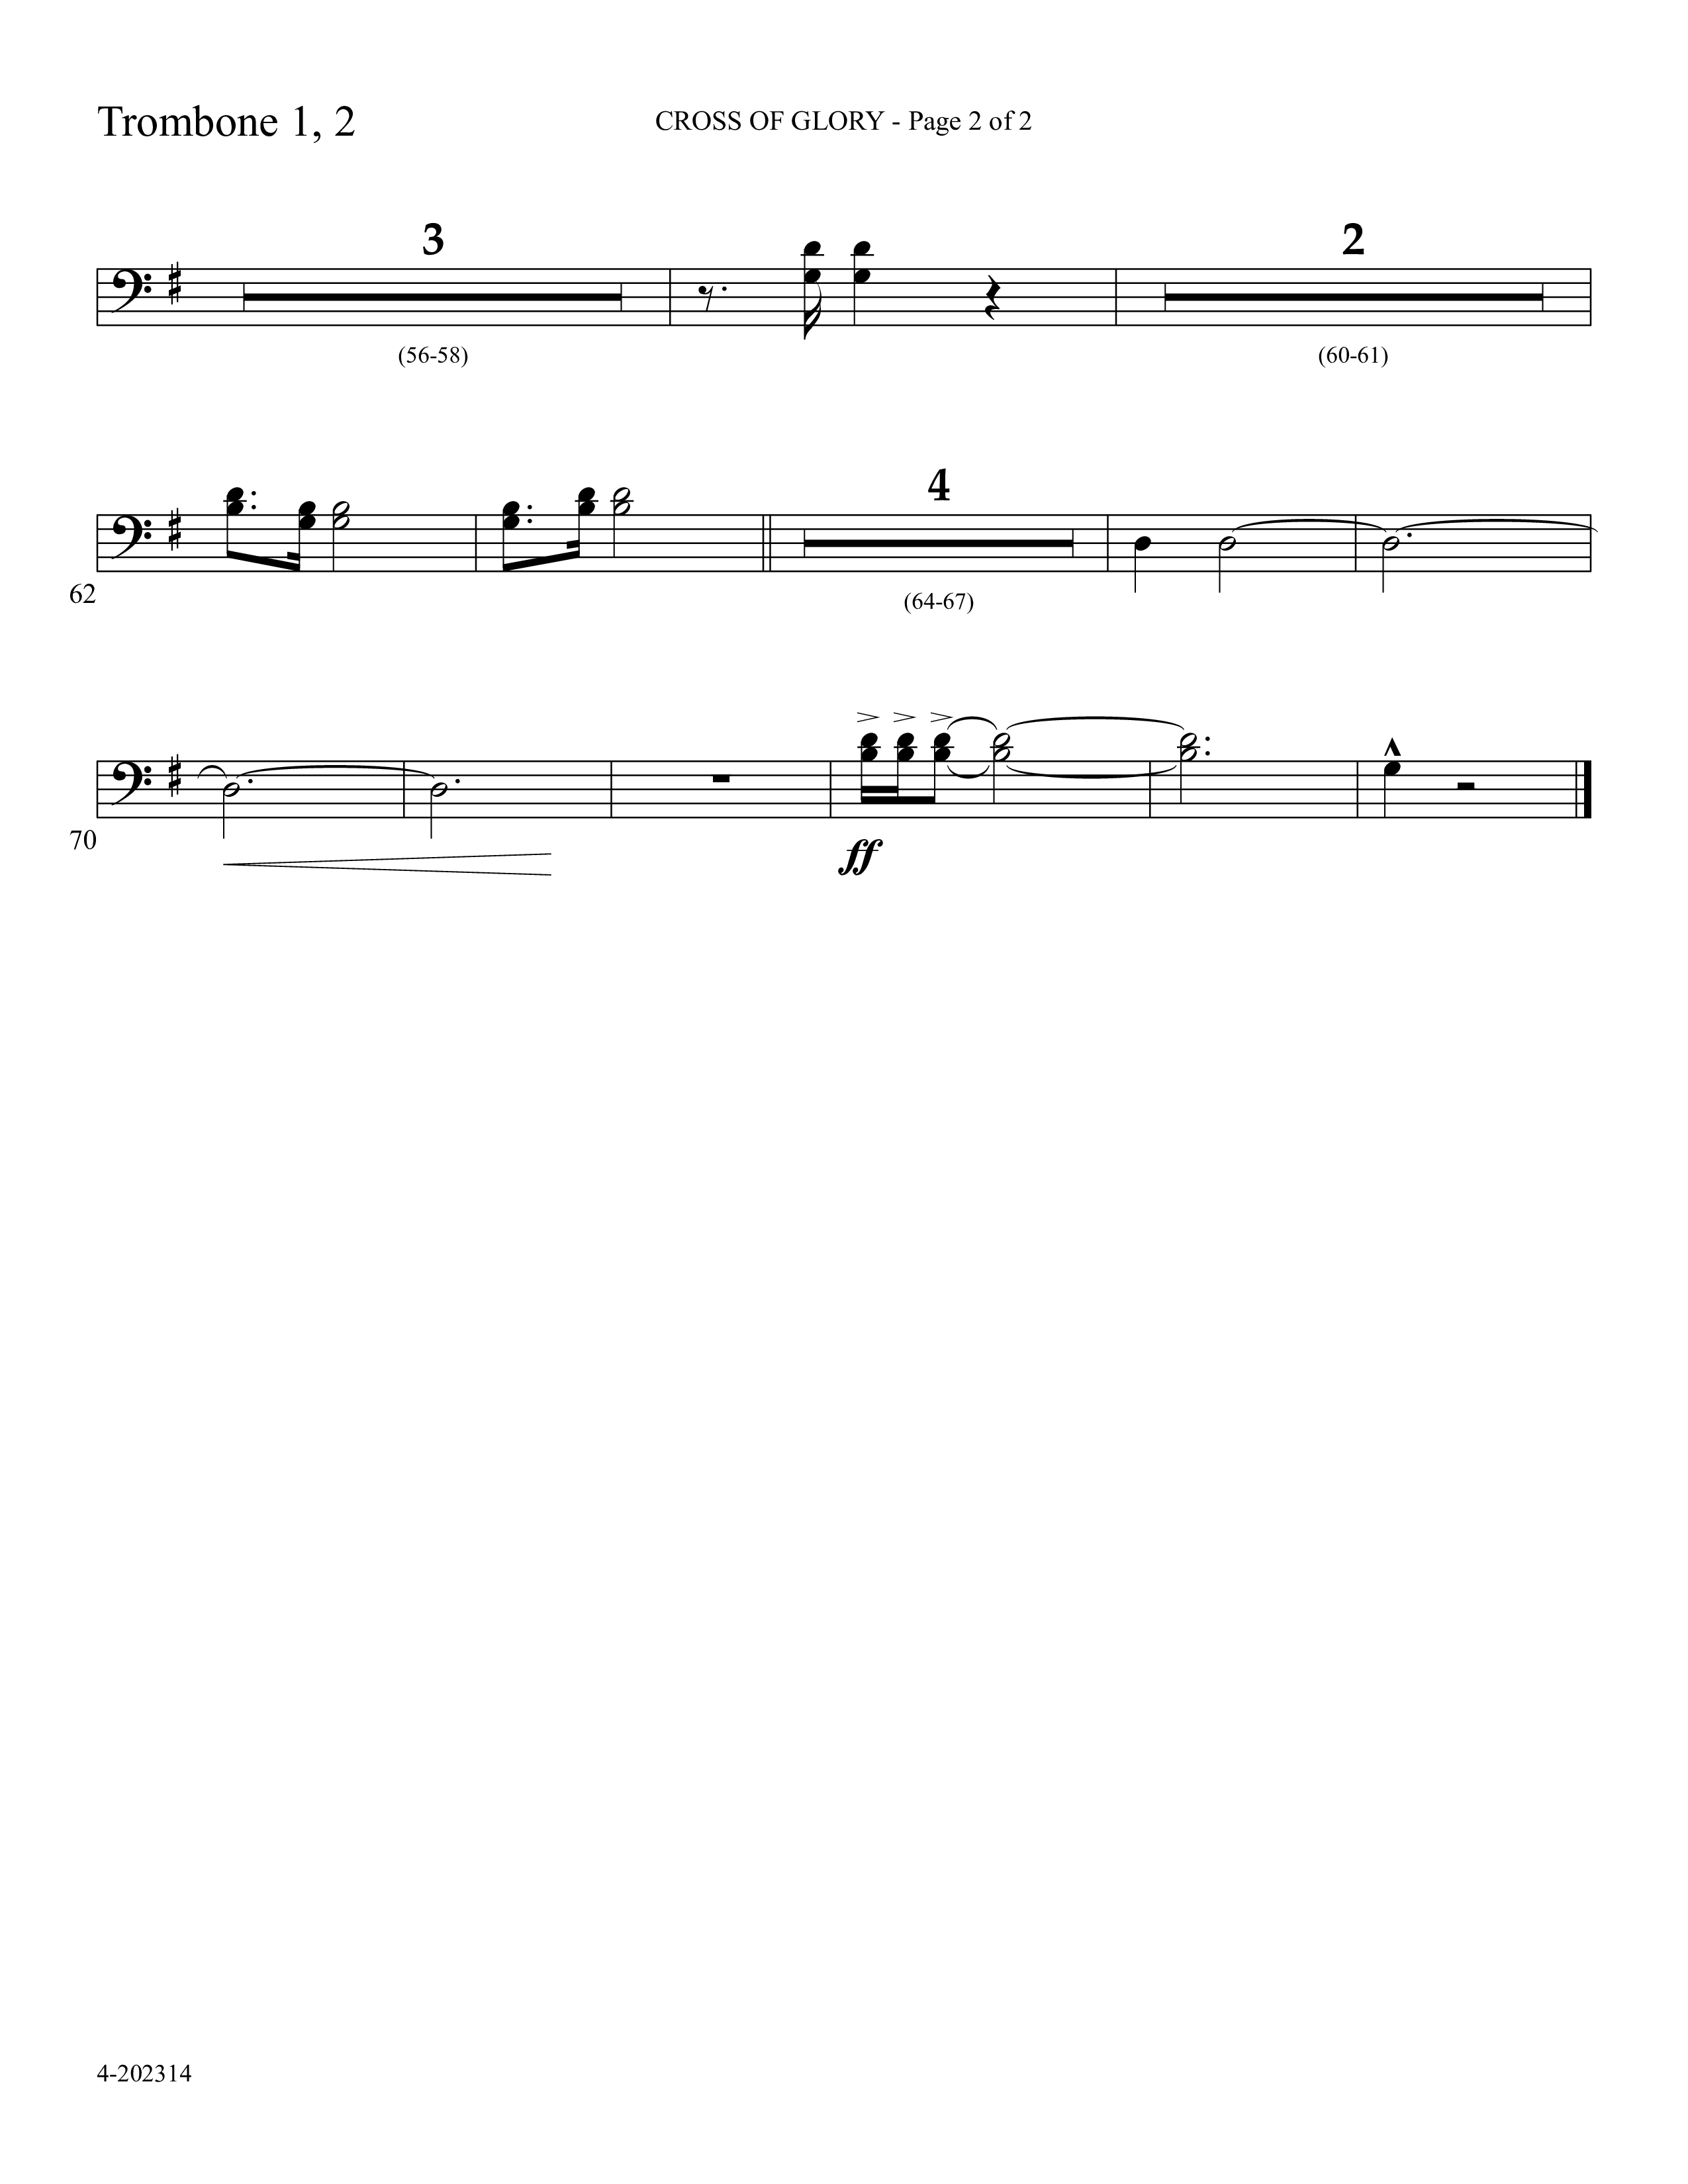 Cross Of Glory (Choral Anthem SATB) Trombone 1/2 (Foster Music Group / Arr. Marty Parks)